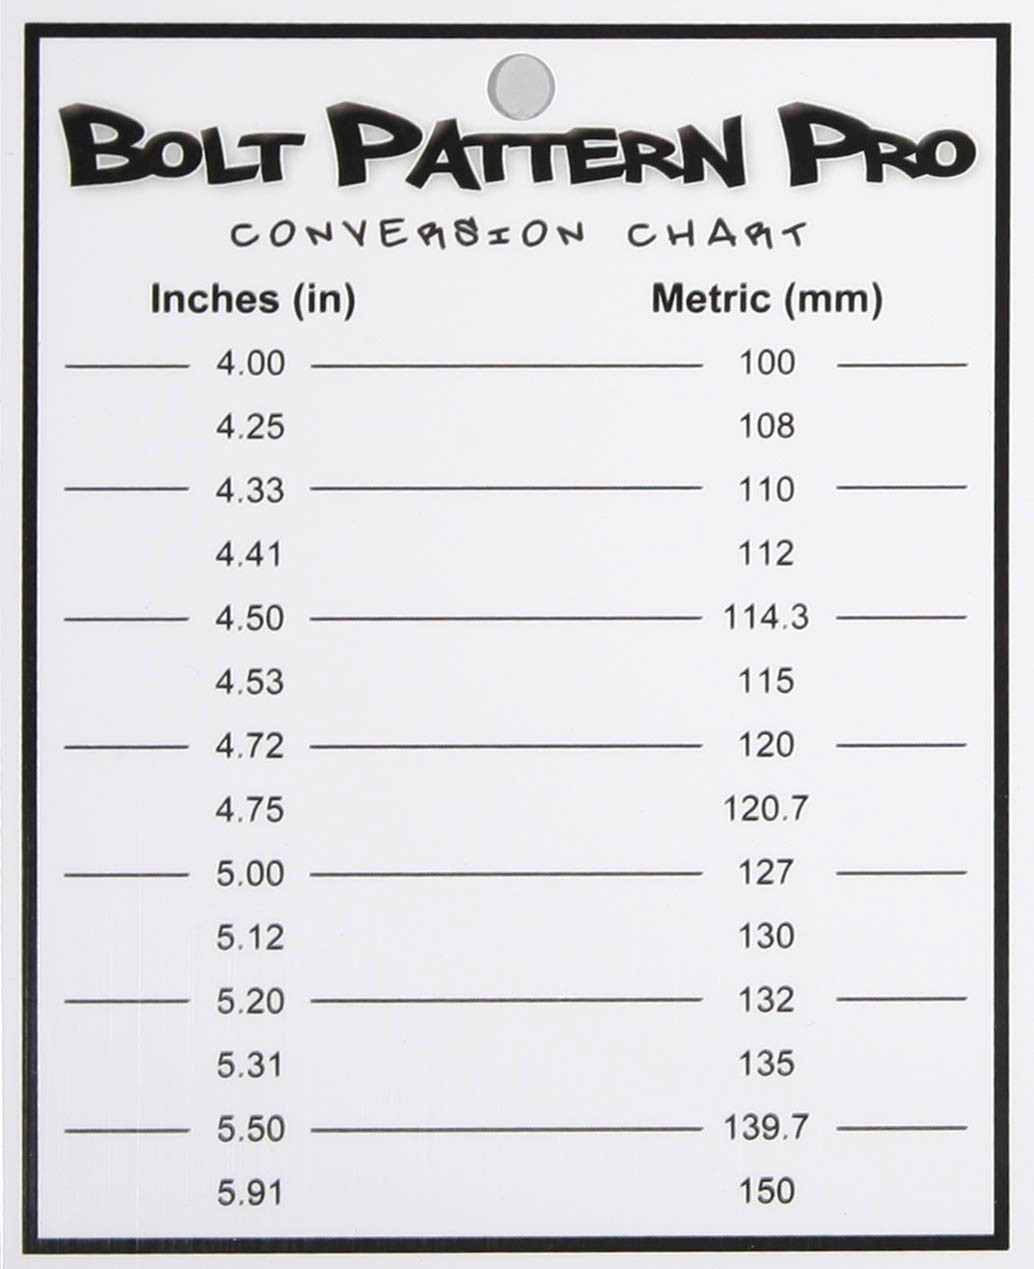 bolt-pattern-pro-receives-patent-approval-for-innovation-in-wheel-rim-measurement